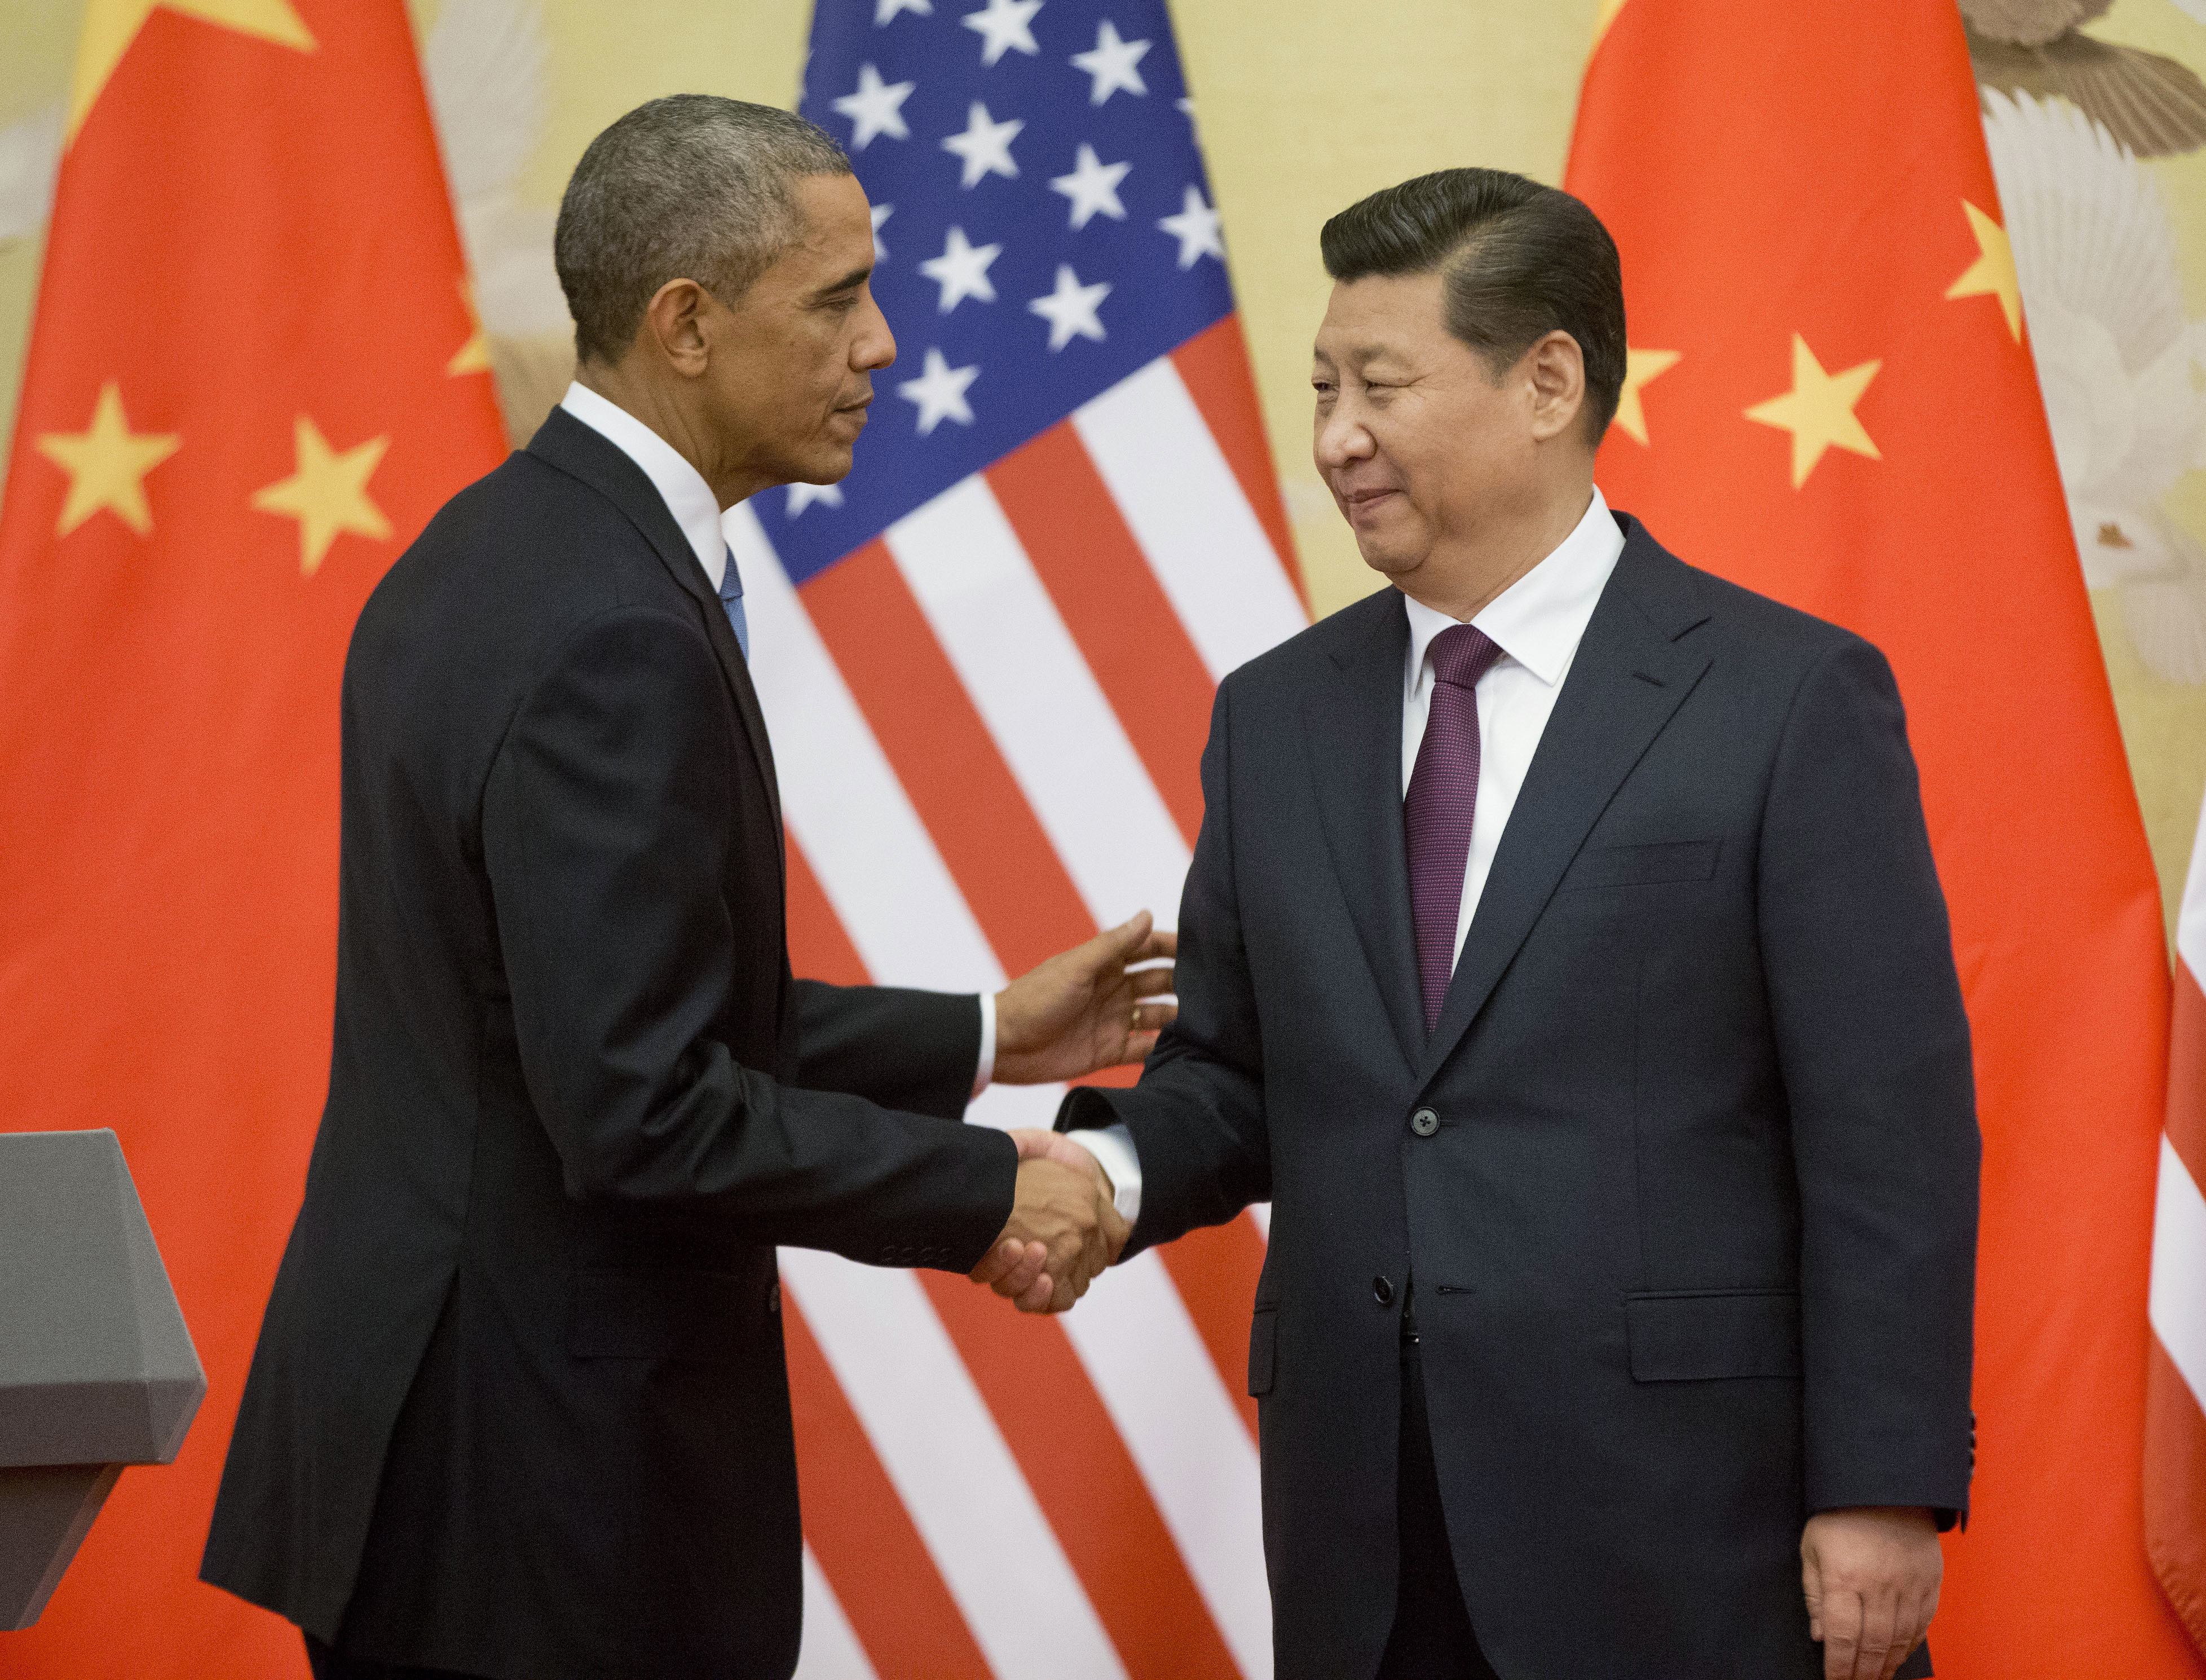 US President Barack Obama and Chinese President Xi Jinping at the conclusion of their joint news conference  in Beijing last year. Photo: AP